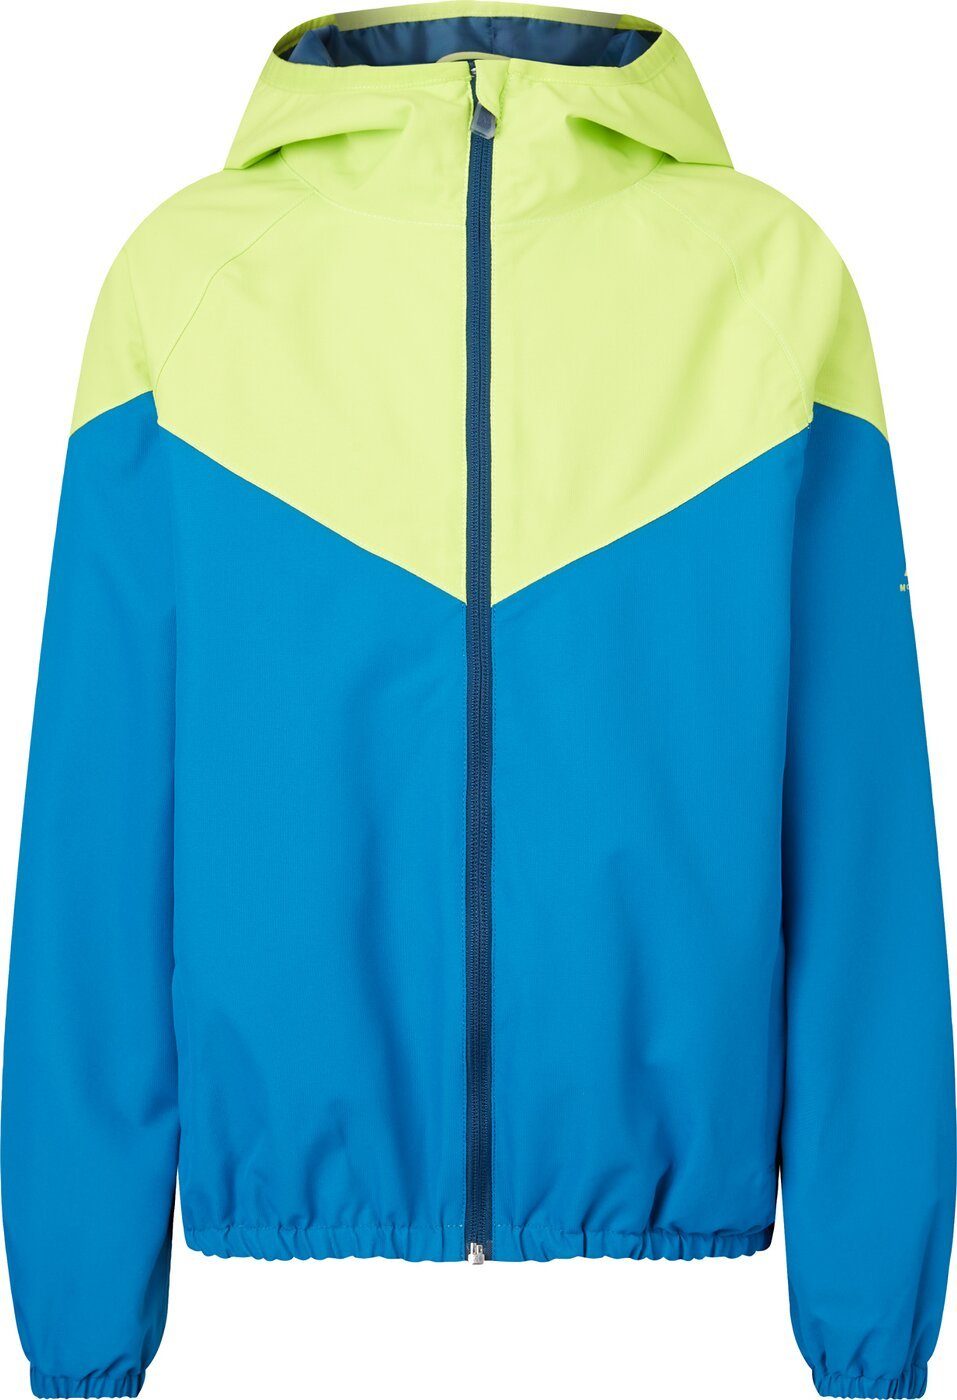 McKINLEY Funktionsjacke Mancor Outdoor Jungs Trekking Wanderjacke Kinder McKinley Funktionsjacke 901 BLUEPETROL/GREENLIME